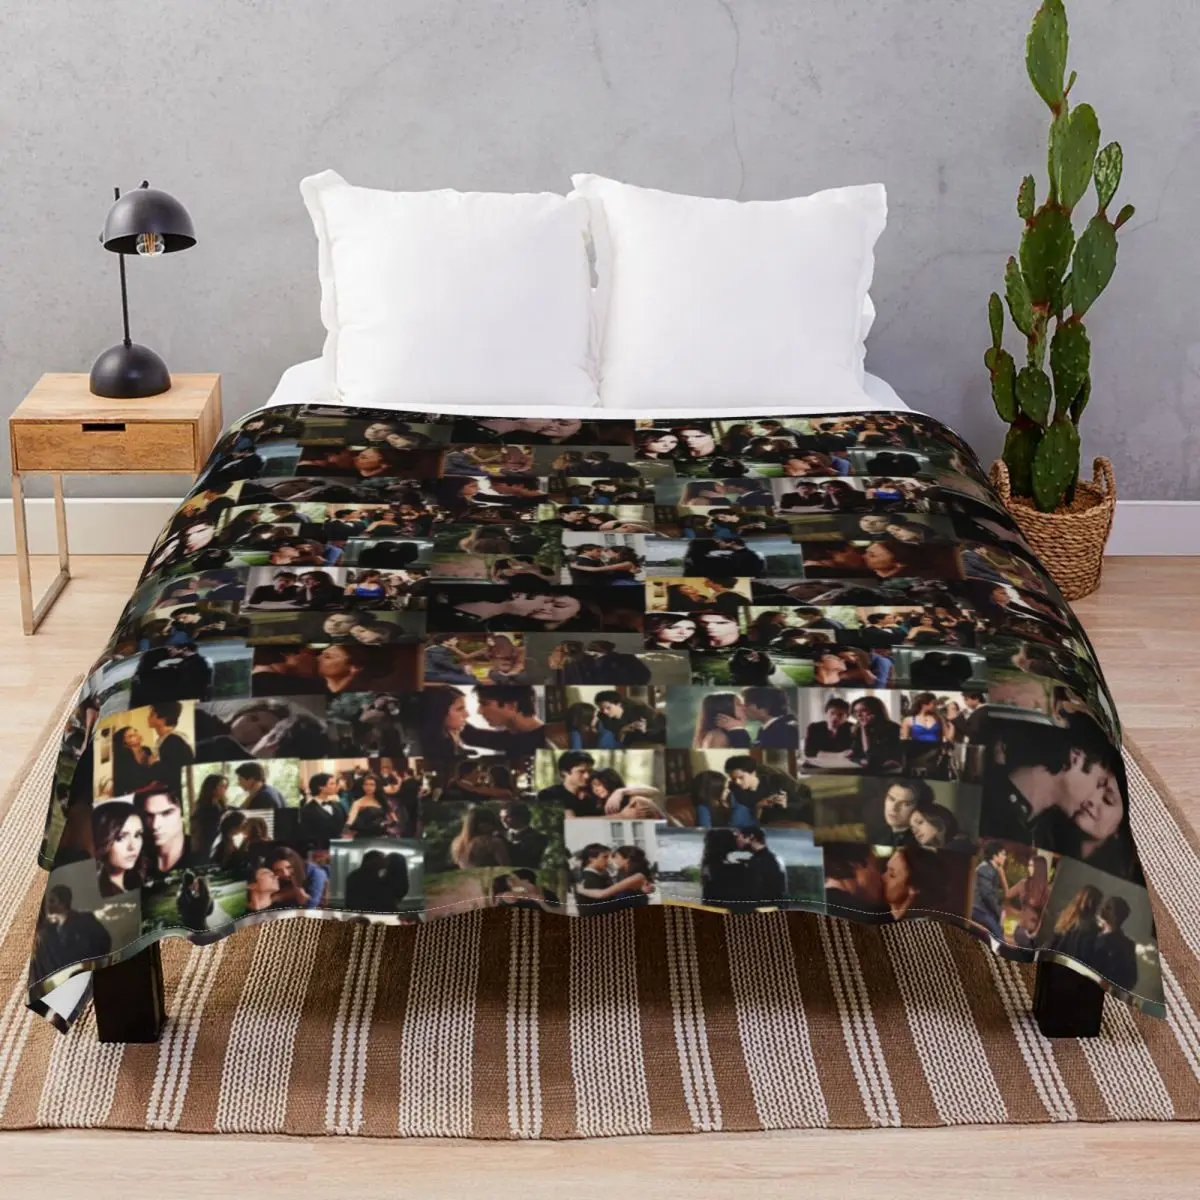 Delena Ship Blankets Flannel Summer Fluffy Throw Blanket for Bed Home Couch Camp Office